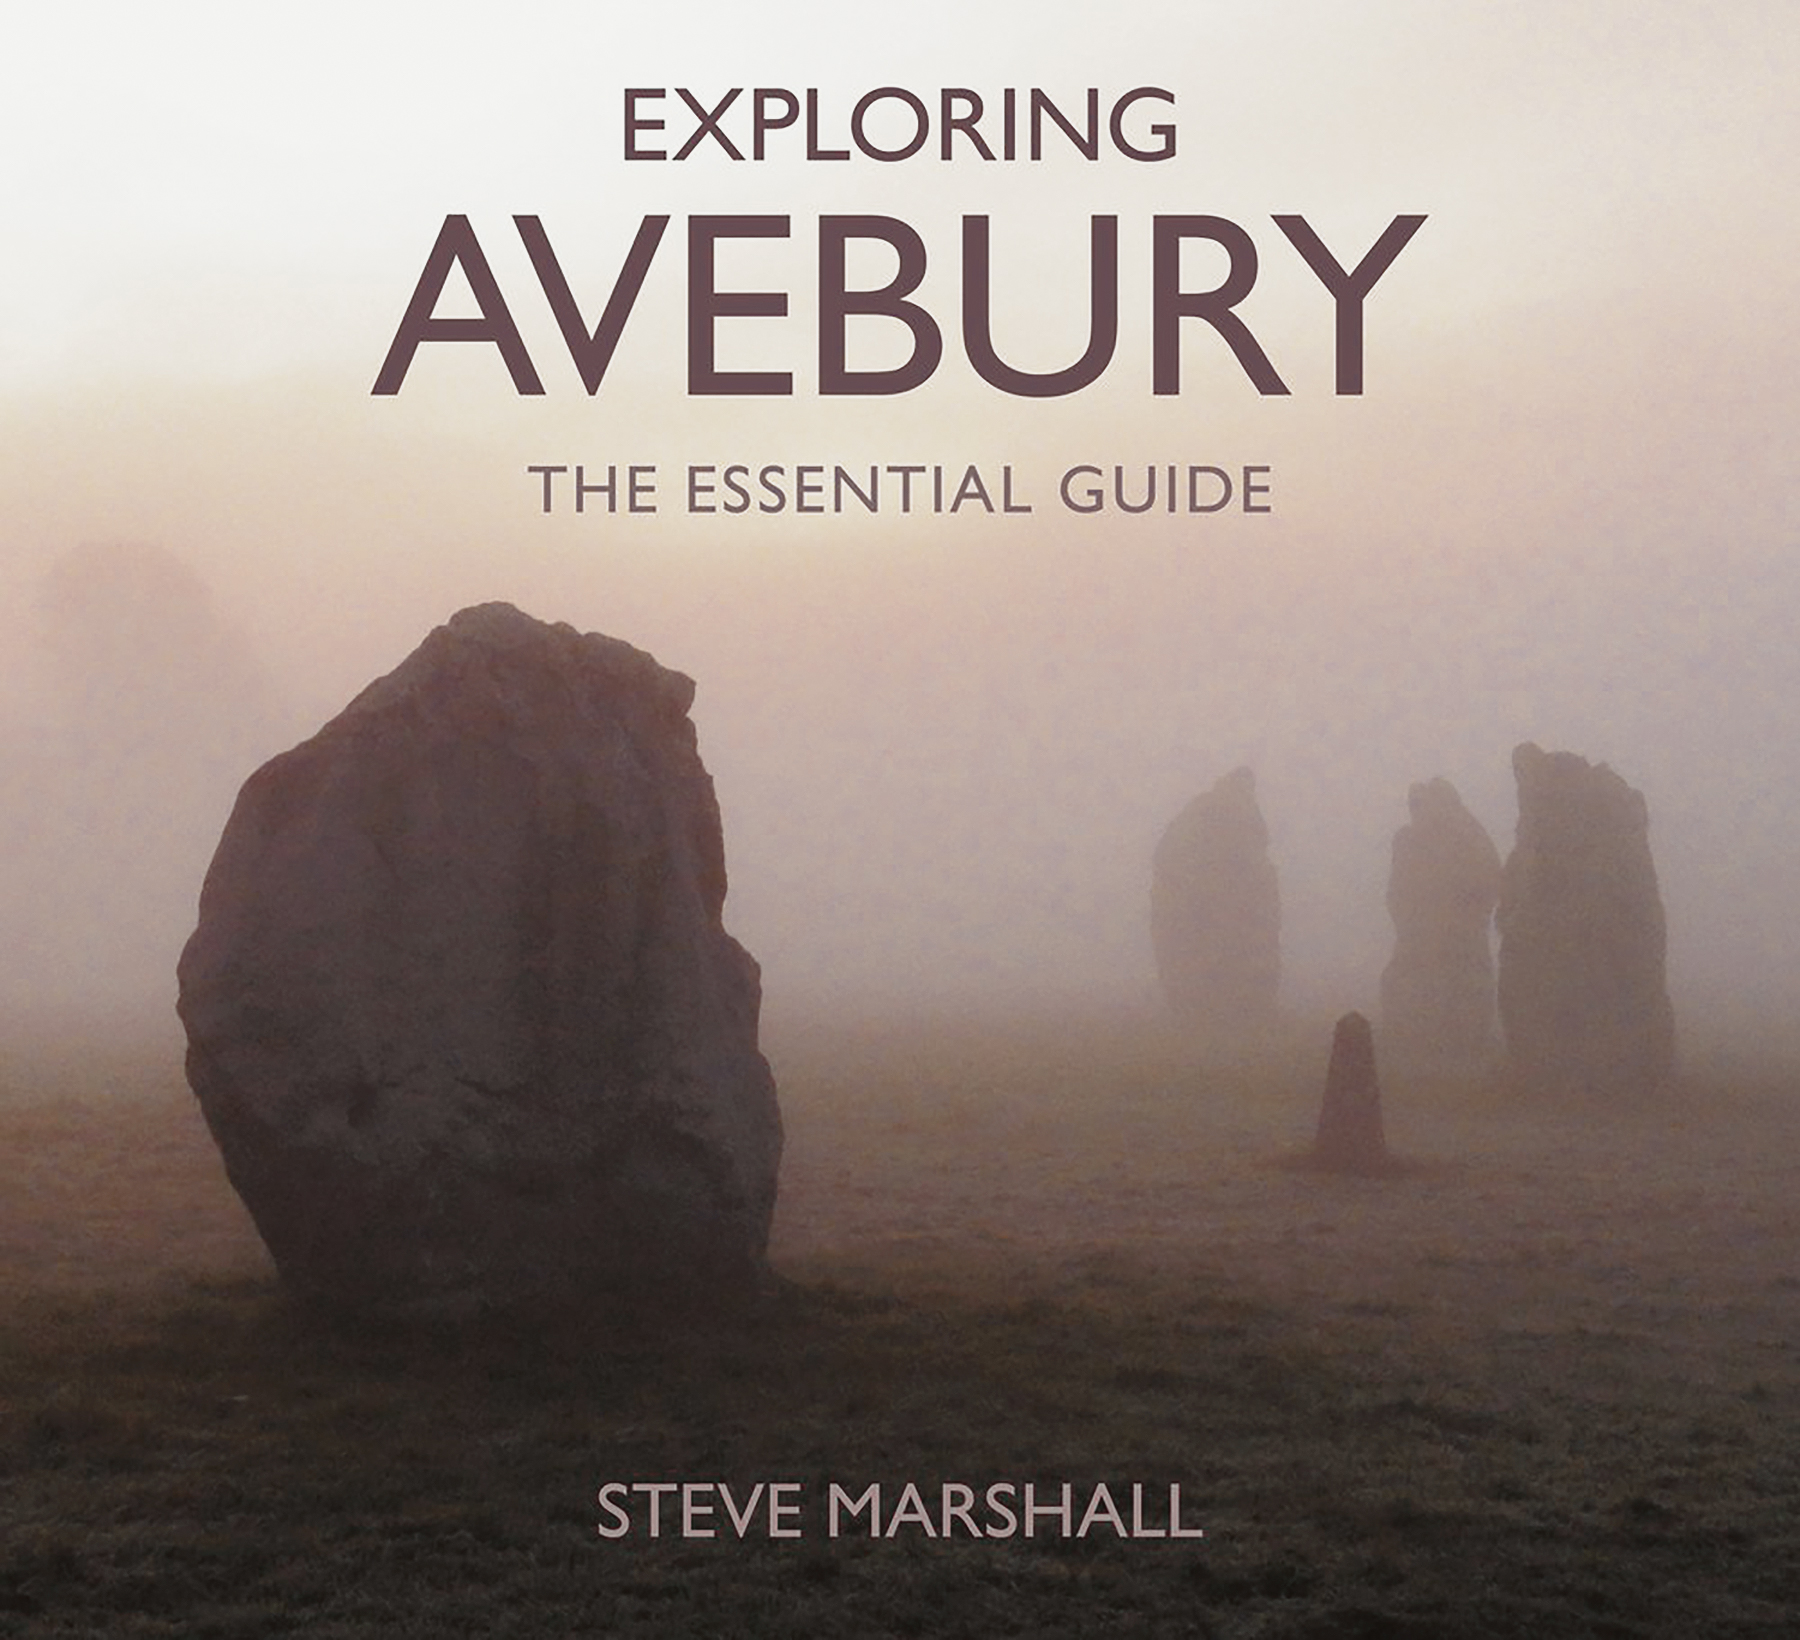 Exploring Avebury The Essential Guide by Steve Marshall